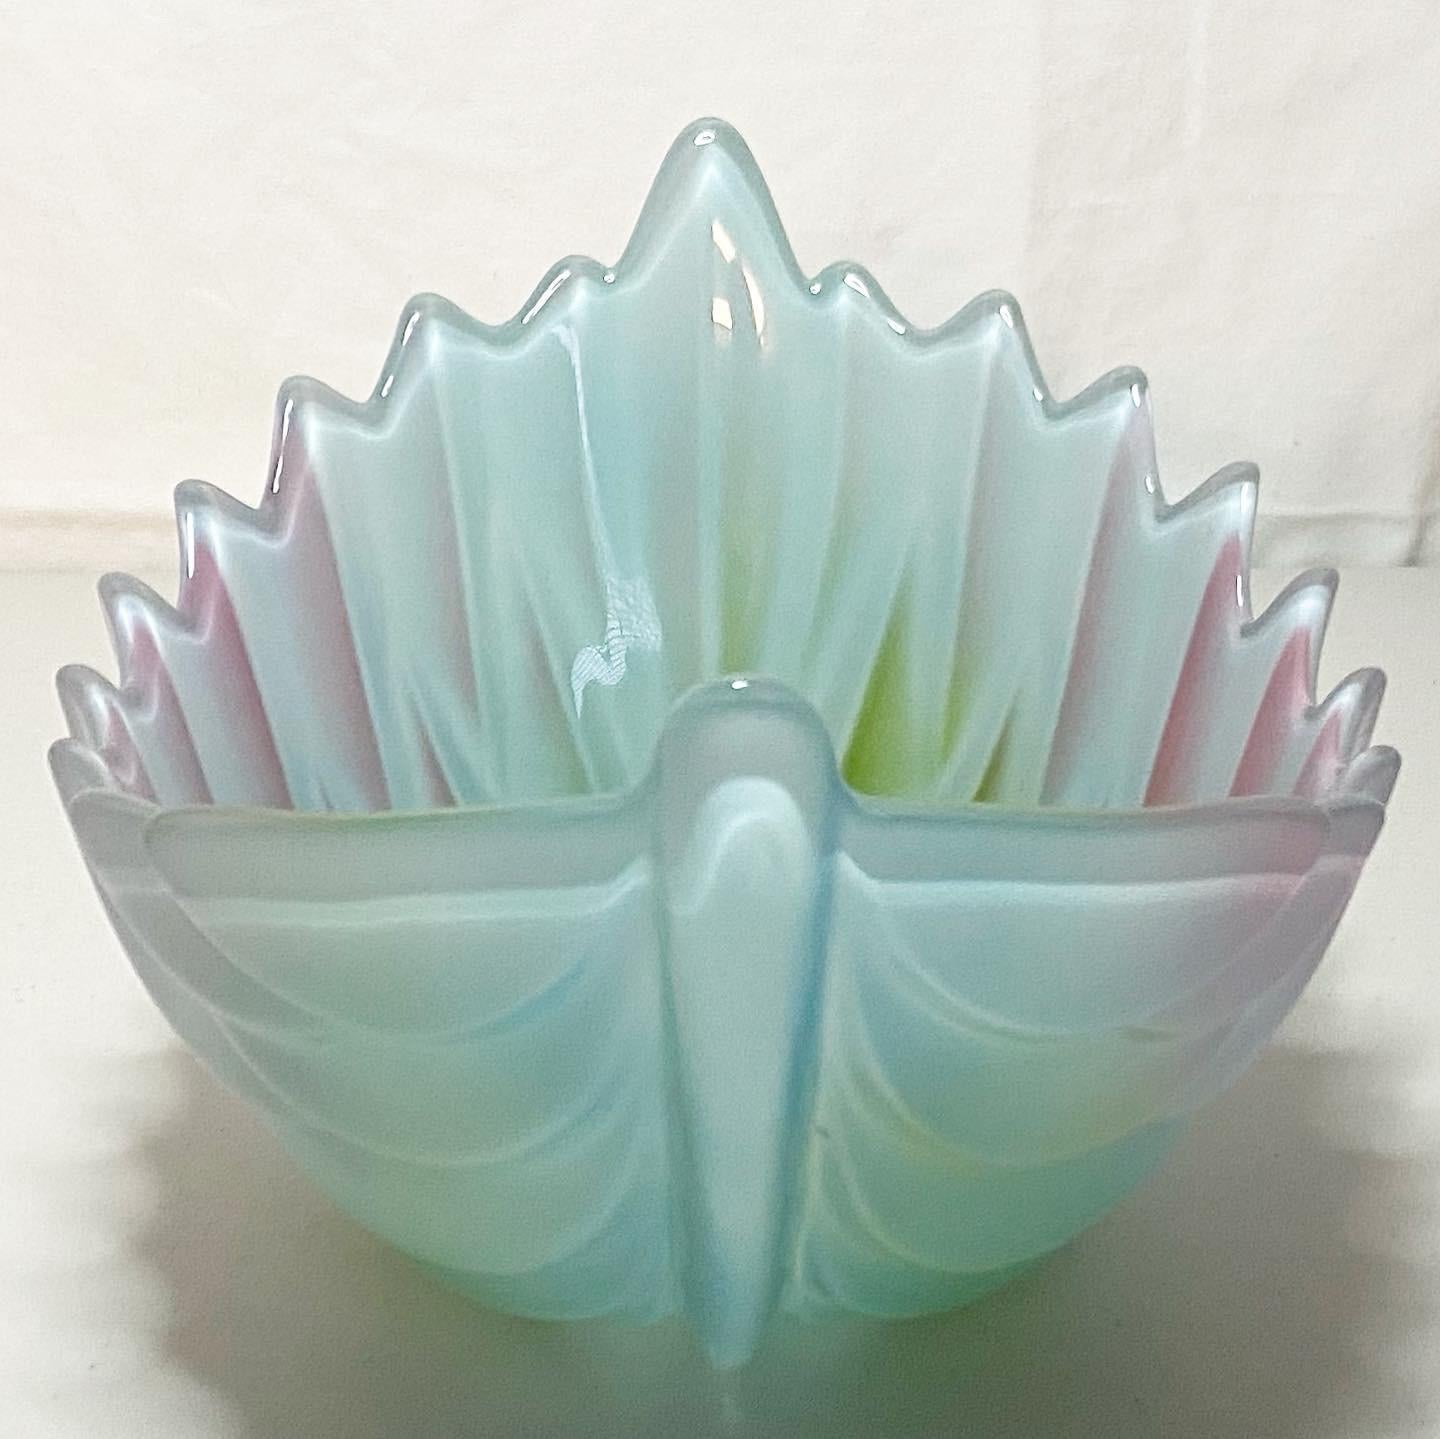 Gorgeous pink, blue, and green large leaf shaped glass serving bowl.
